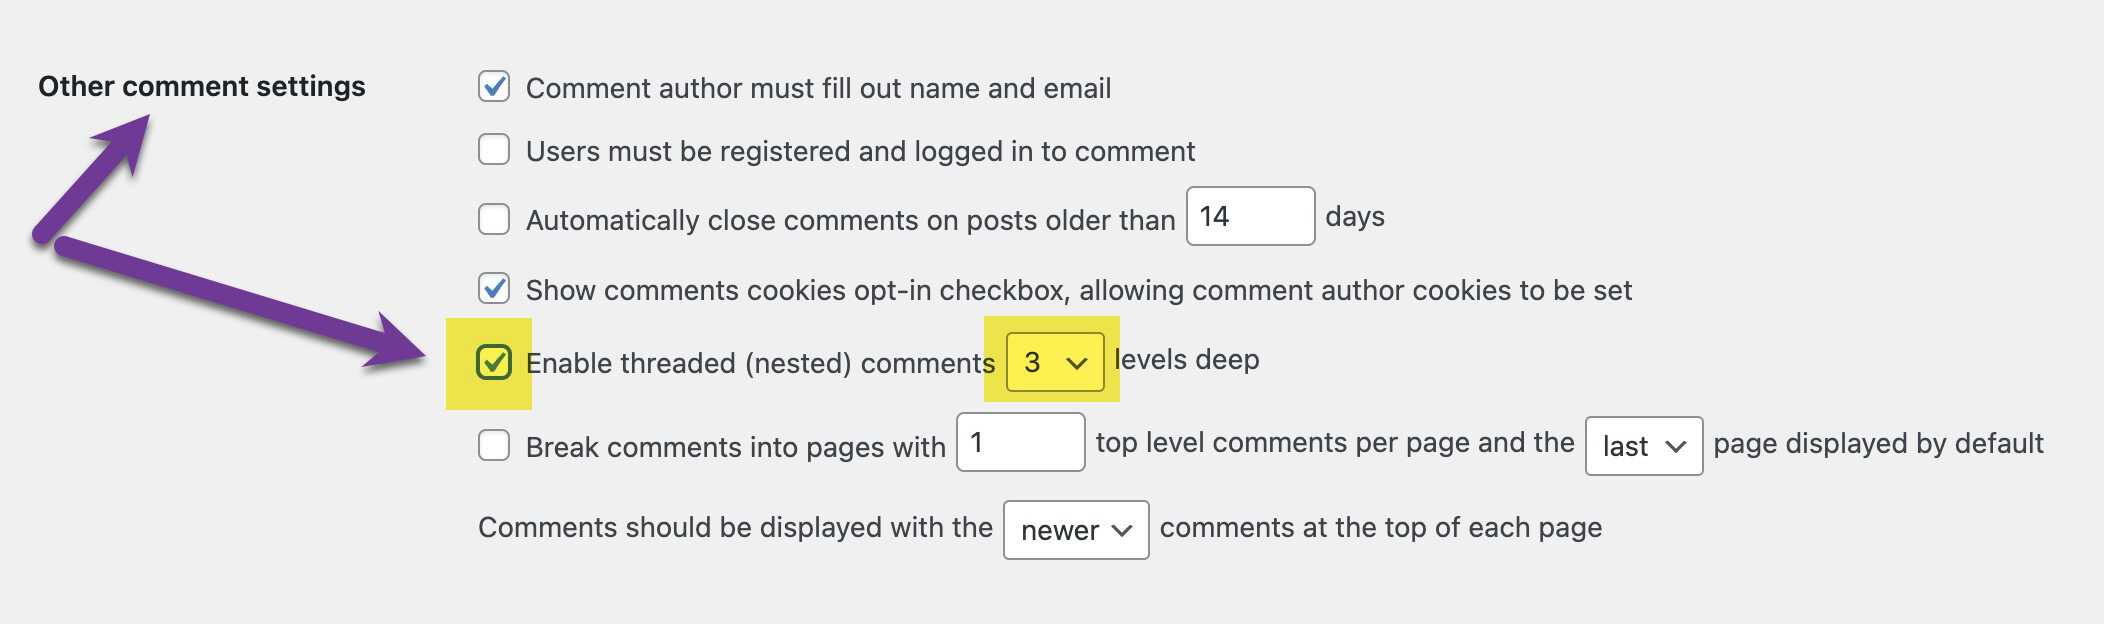 WordPress Other comment settings under the Discussion settings with threaded comments enabled 3 levels deep.